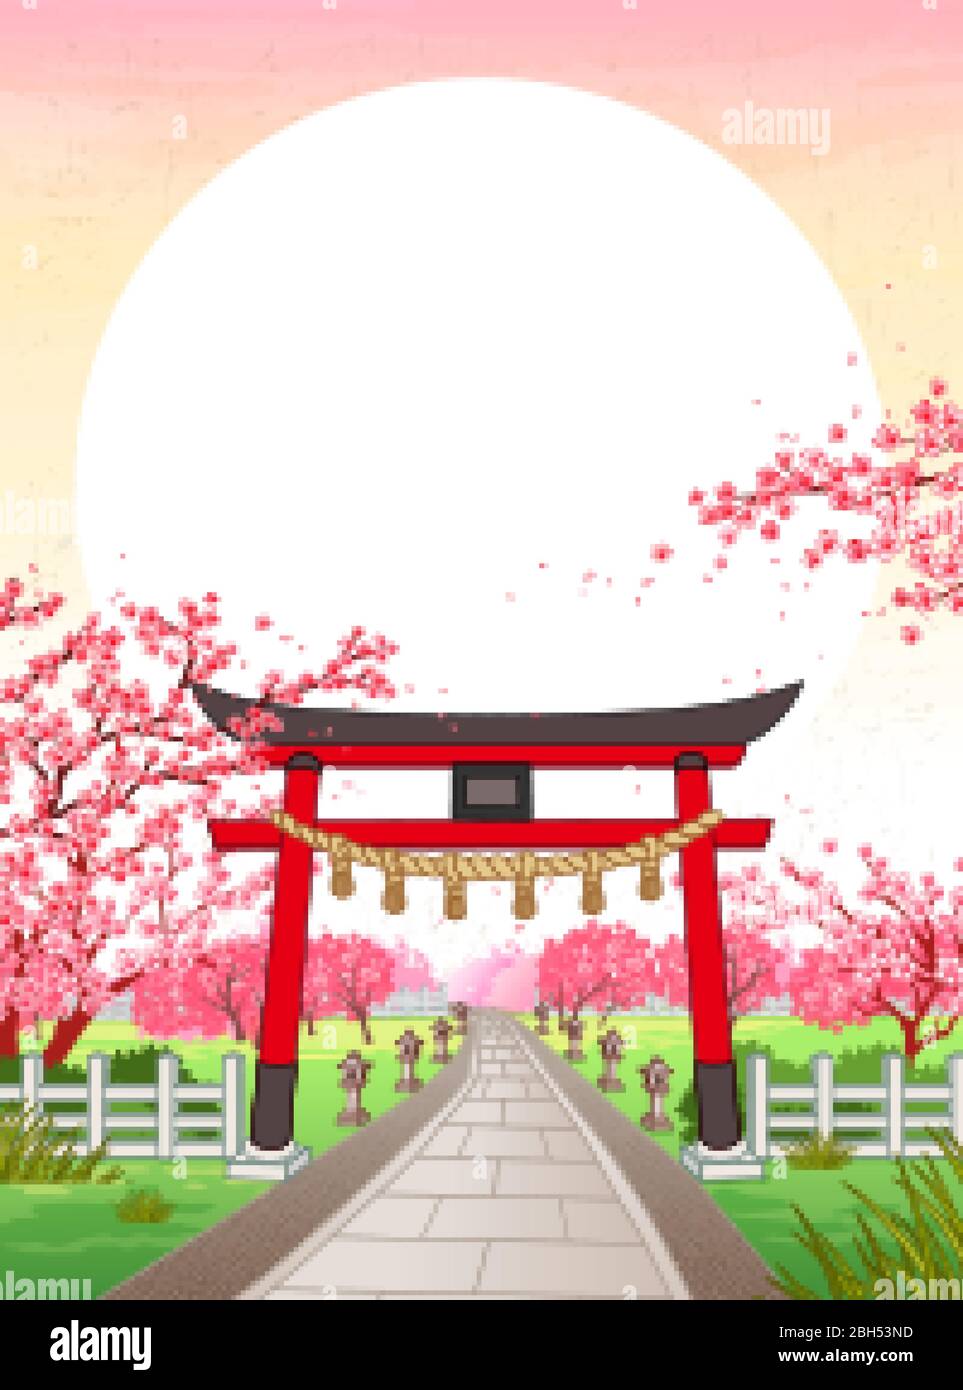 Japan ukiyo-e style cherry blossom garden with traditional Japanese shrine gate guarding the entrance and large sun hanging above as copy space Stock Vector